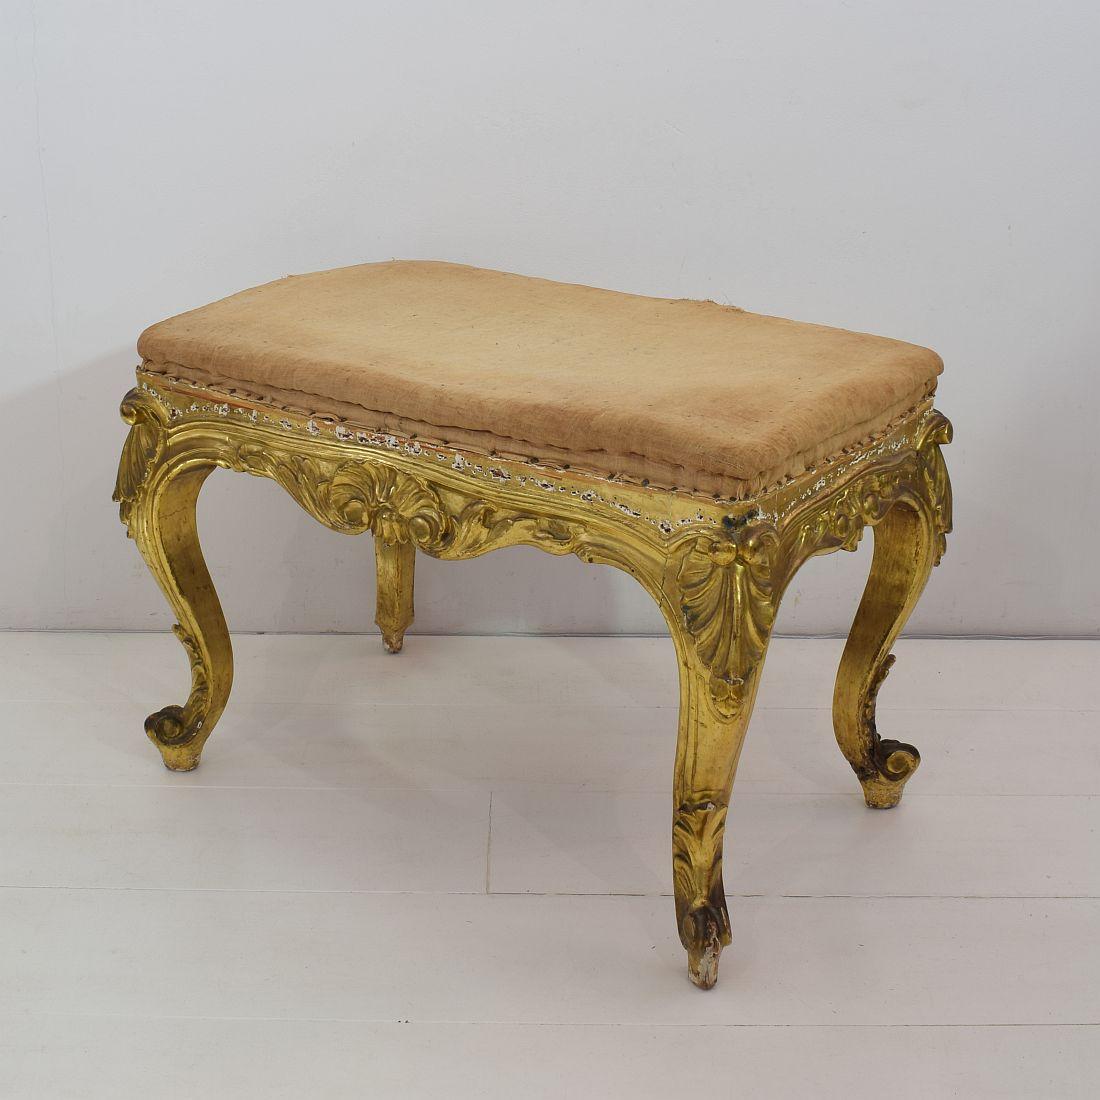 Gilt 19th Century Spanish Gilded Louis XVI Style Carved Stool or Tabouret